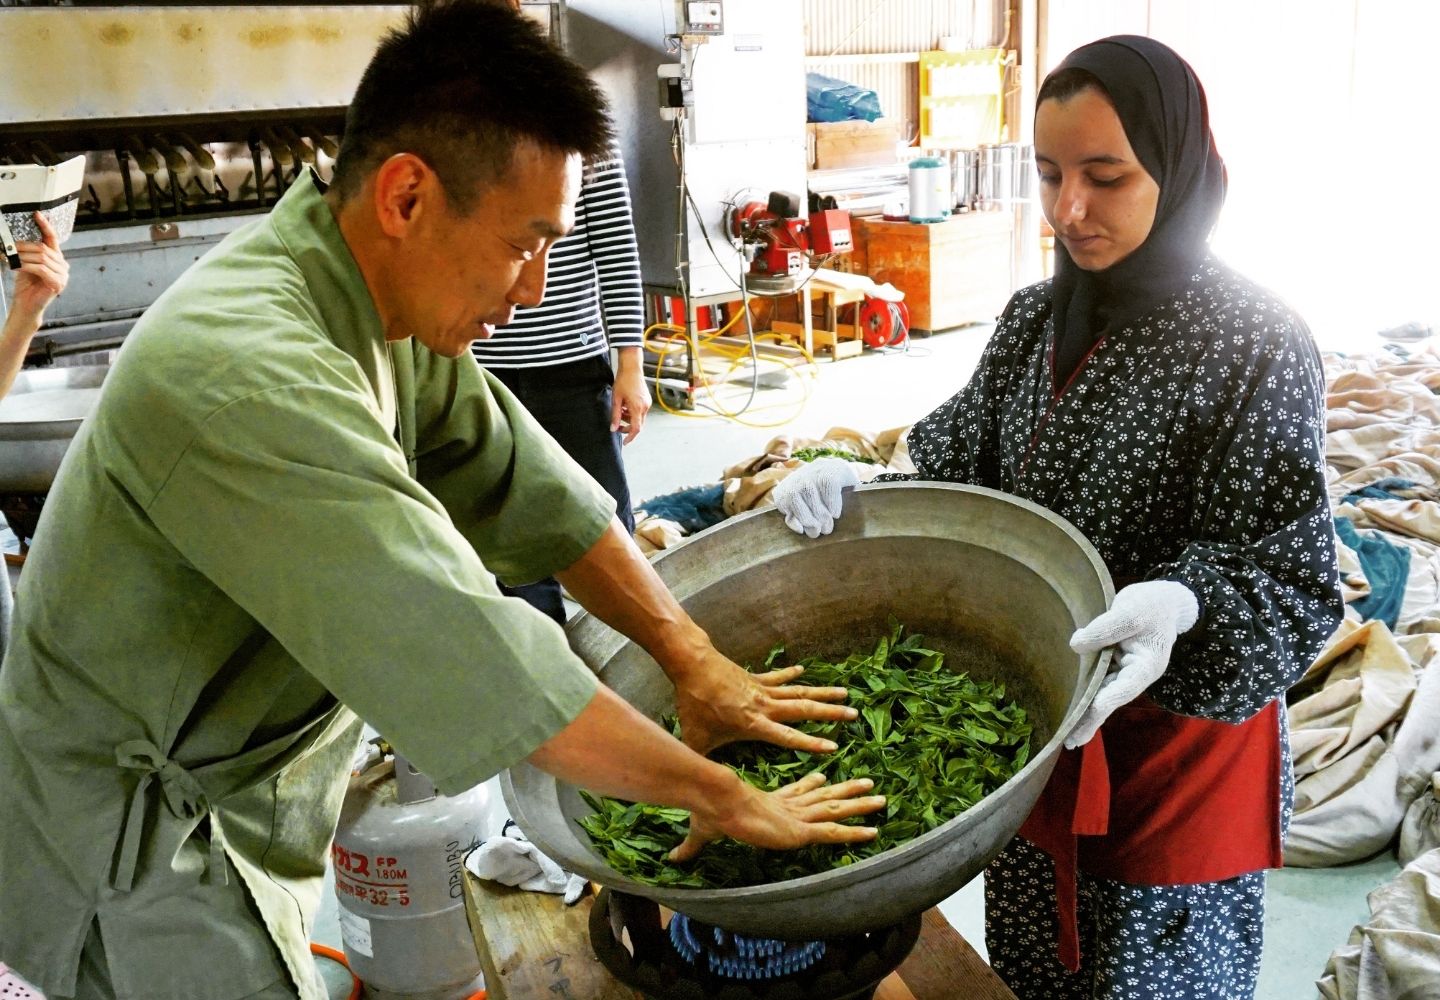 A photo showing two people panning some tea leaves.